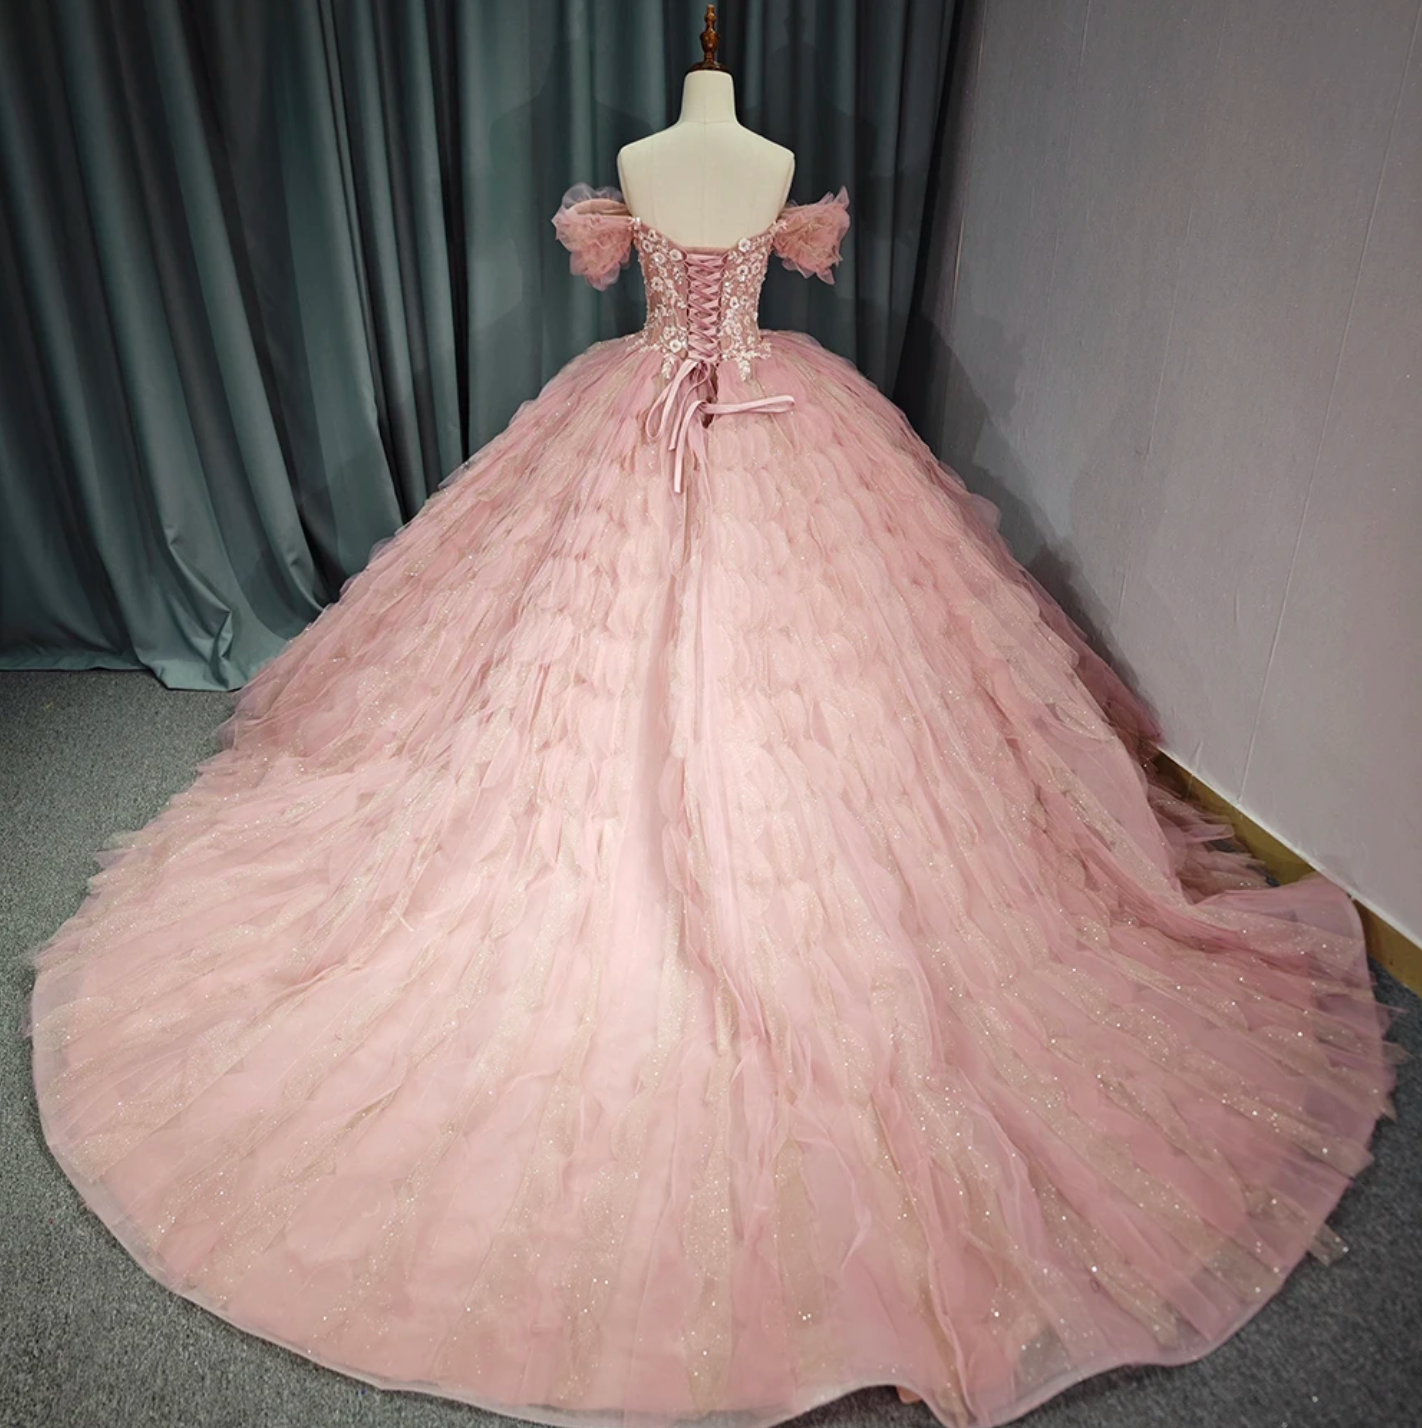 Tulle Tufted Pink Floral Quinceañera Ball Gown Dress